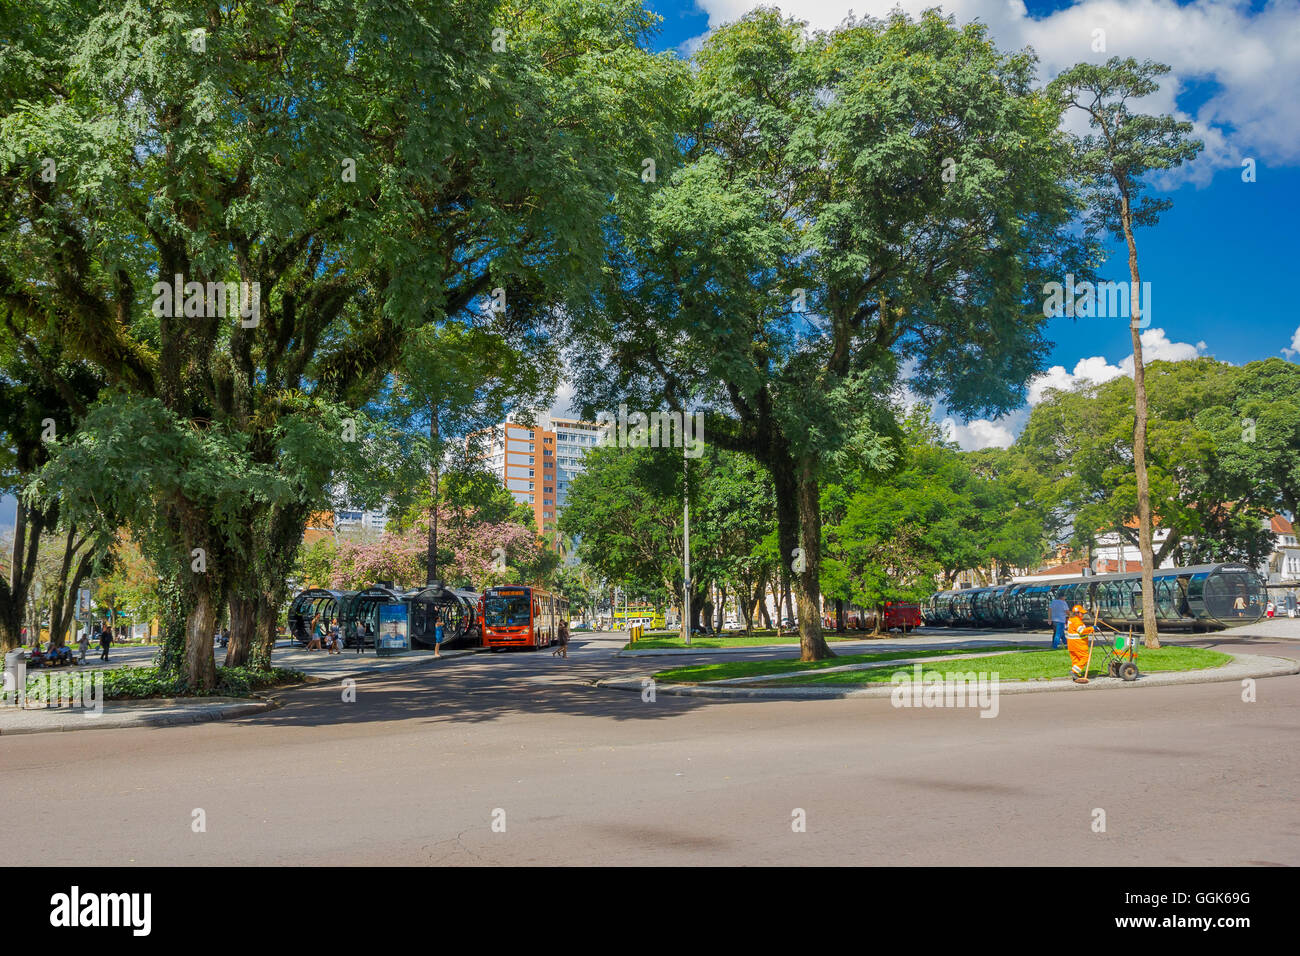 CURITIBA ,BRAZIL - MAY 12, 2016: bus stations located in the middle of a park, big trees in front of the bus stations and some buildings as background Stock Photo